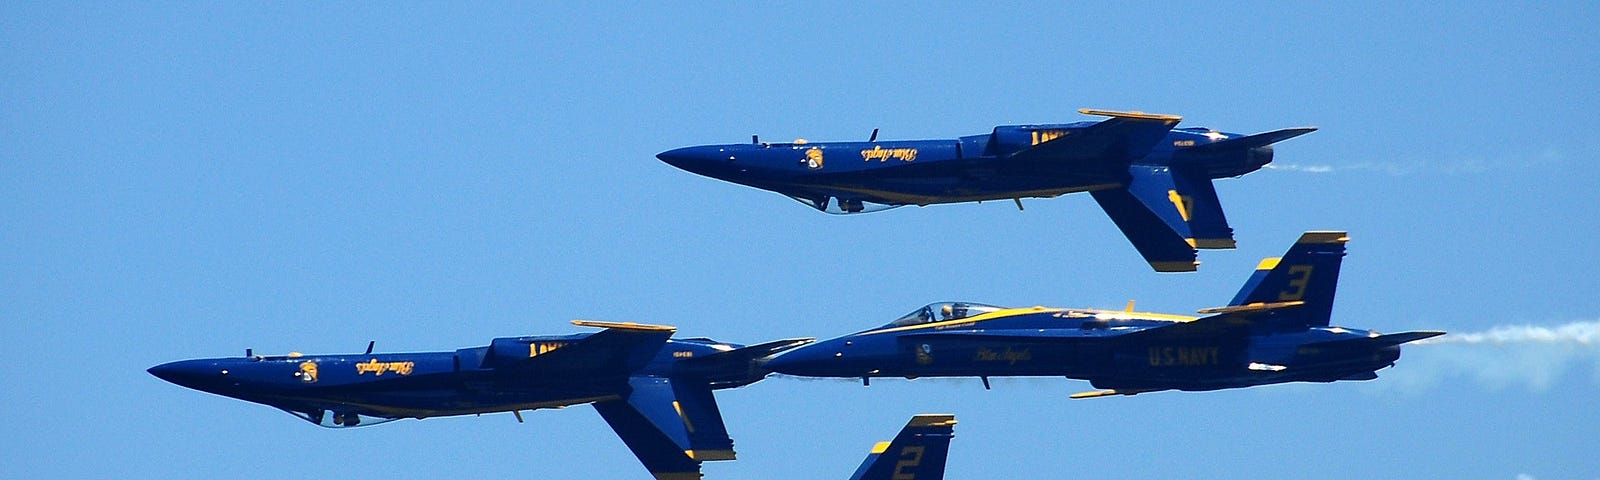 Four blue milltary jets in a tight acrobatic formation